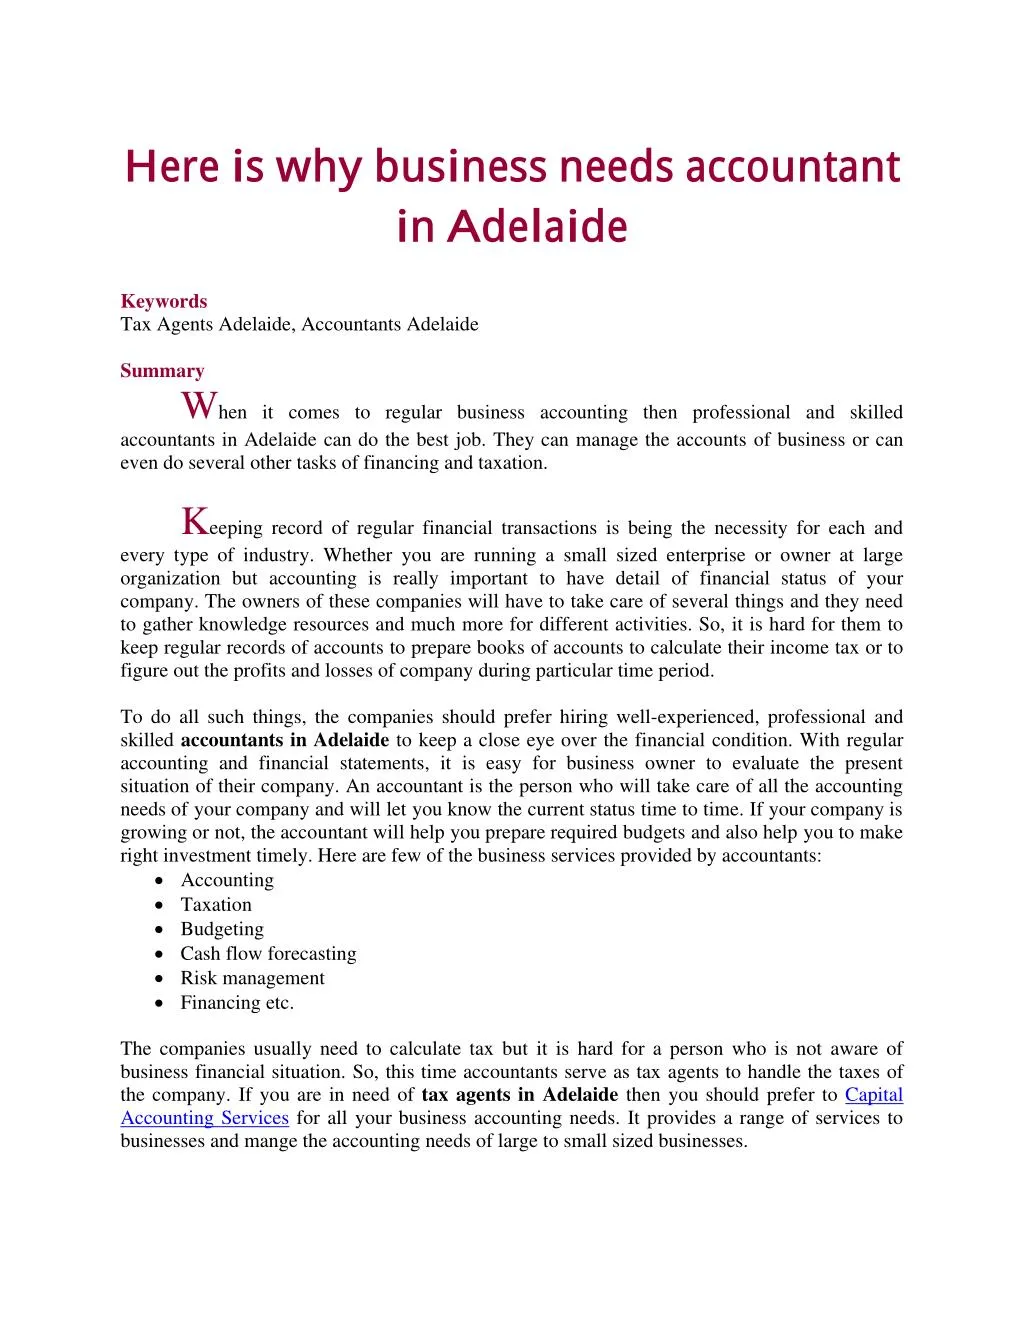 here is why business needs accountant in adelaide